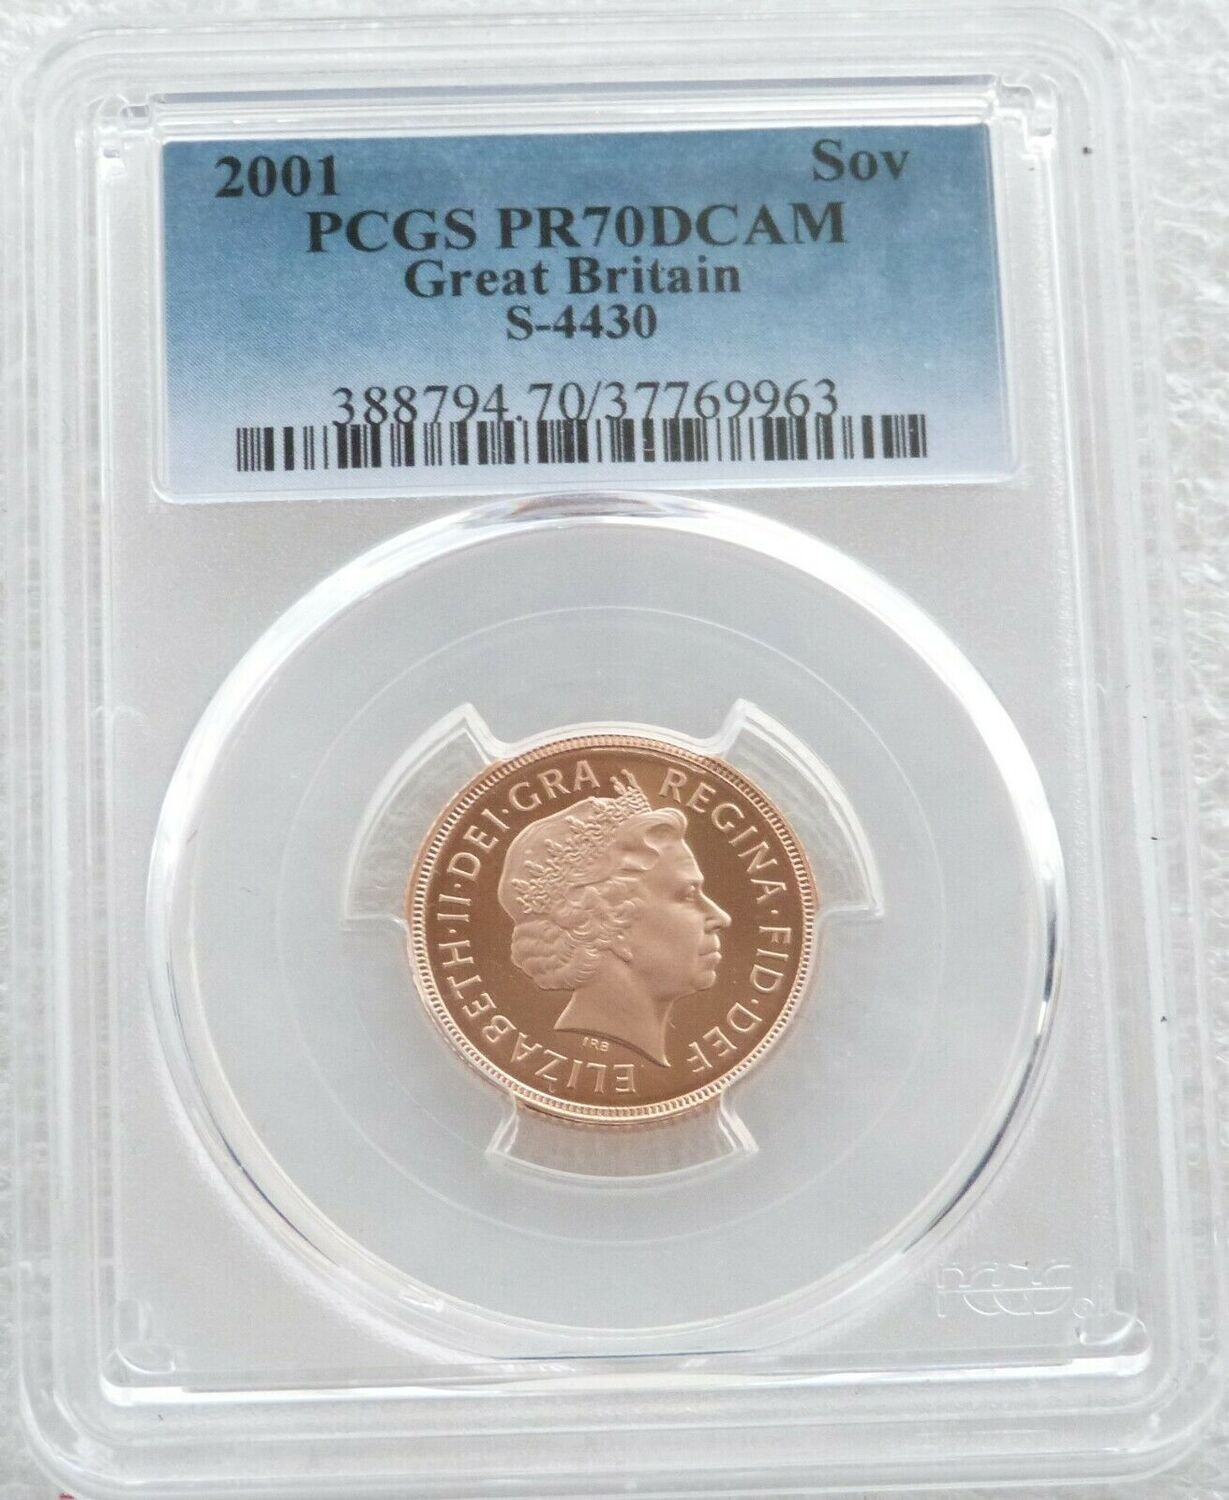 2001 St George and the Dragon Full Sovereign Gold Proof Coin PCGS PR70 DCAM